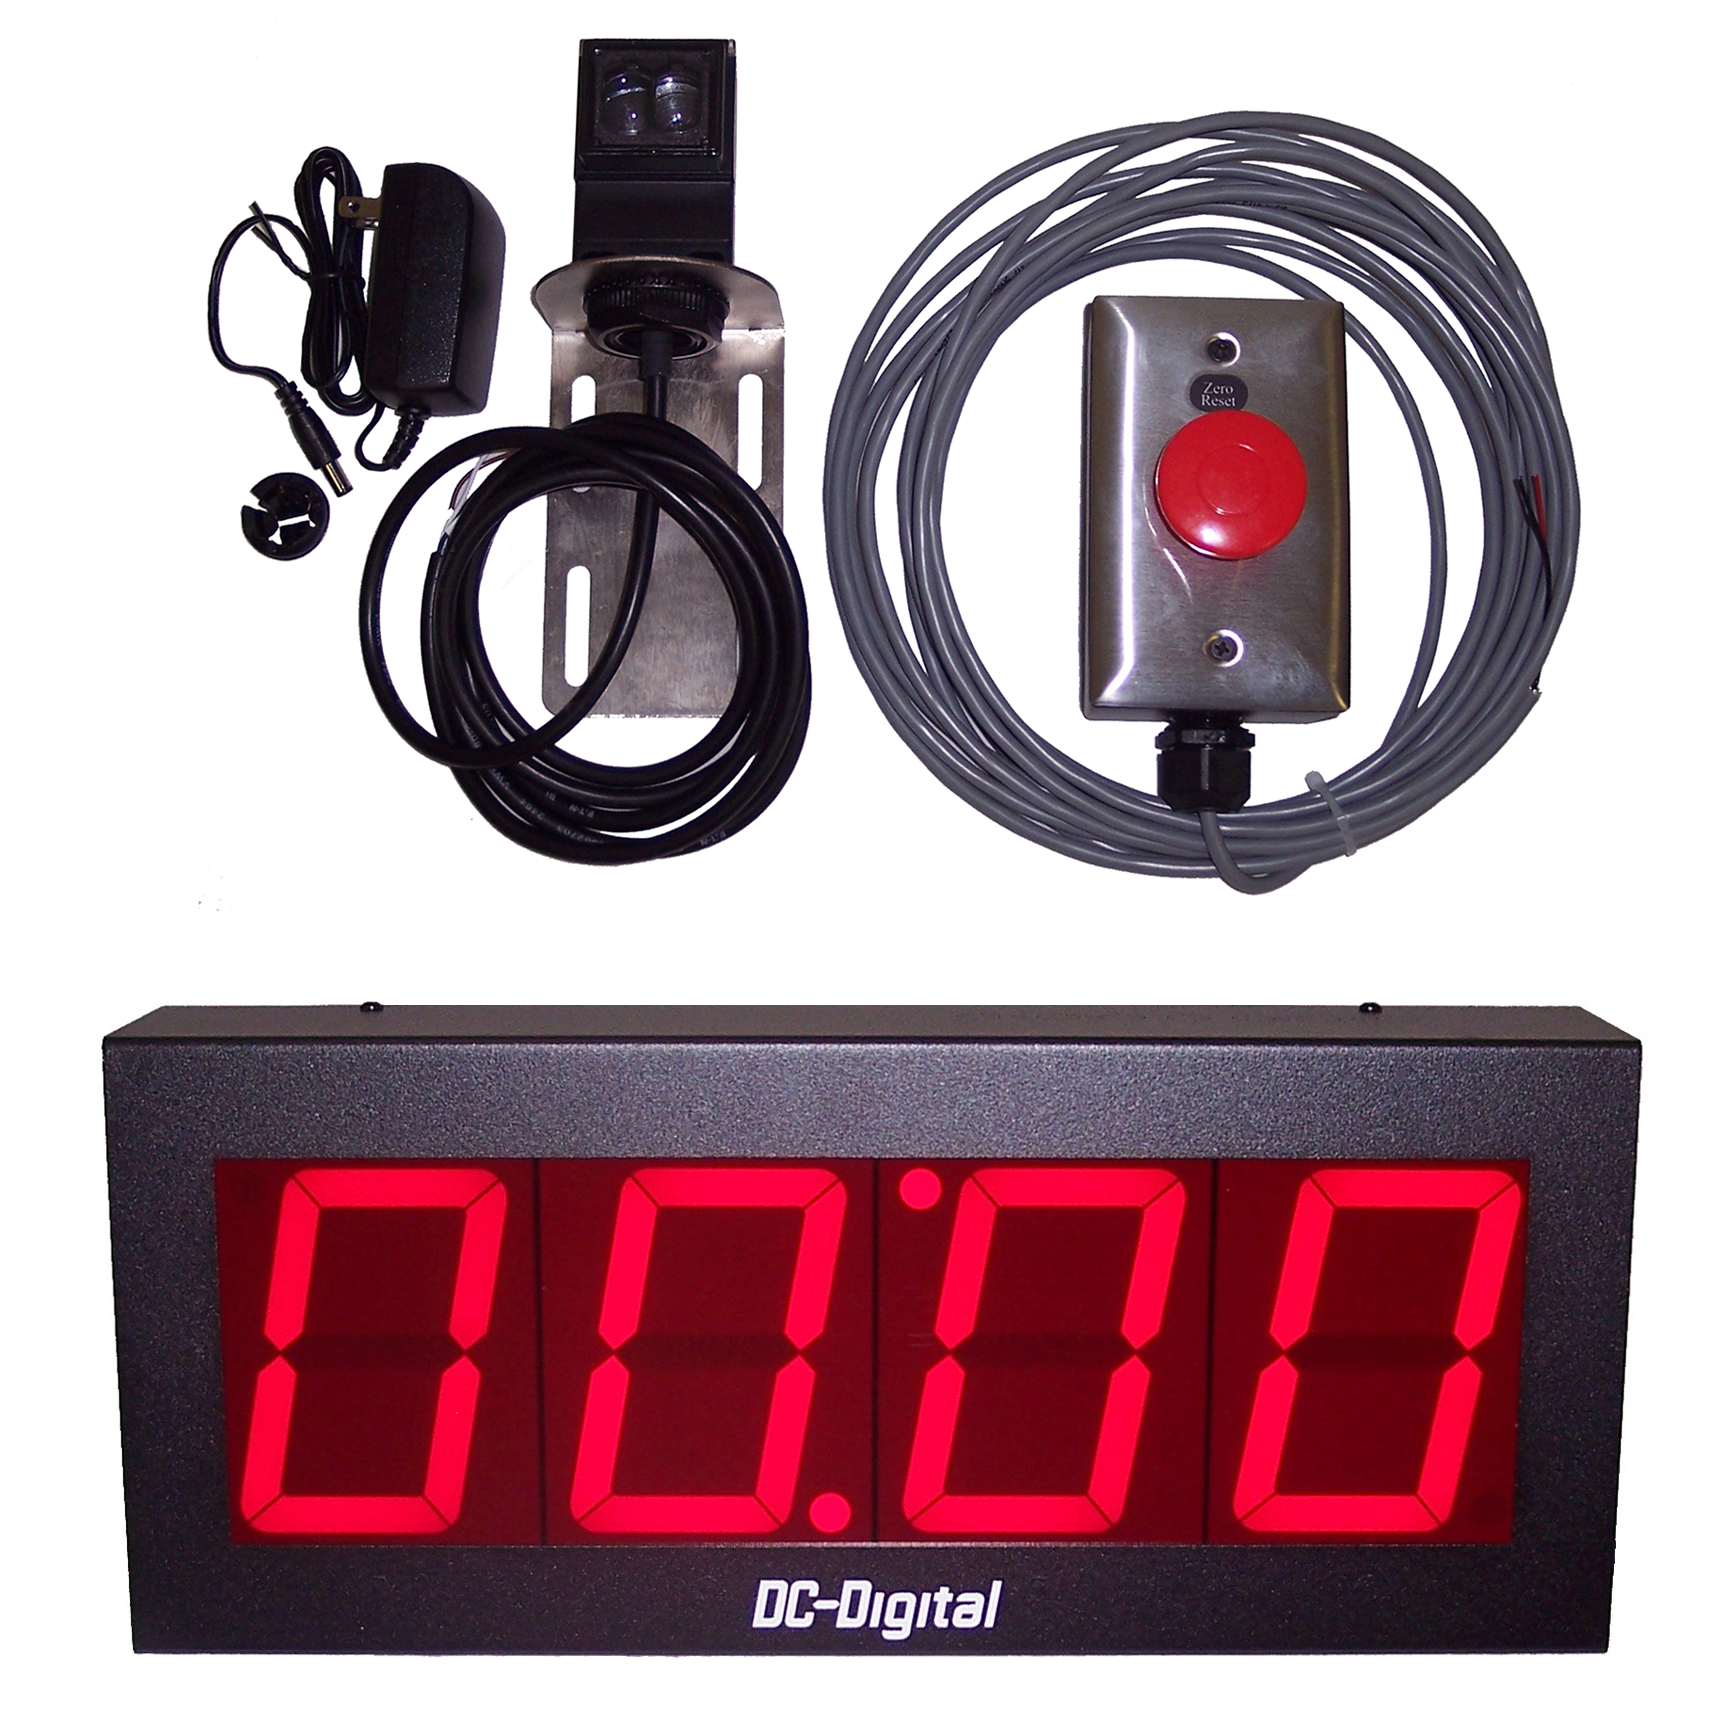 (DC-40T-UP-PKG) 4.0 Inch LED Digital, Process Count Up Timer Package, Includes: Long Range Diffused Photo-Reflective Sensor and Mount (adj. to 10 Feet), 40mm Reset Palm Switch (J-Box, Stainless Cover, 25ft. Cabling) and Power Supply "Ships FREE !"